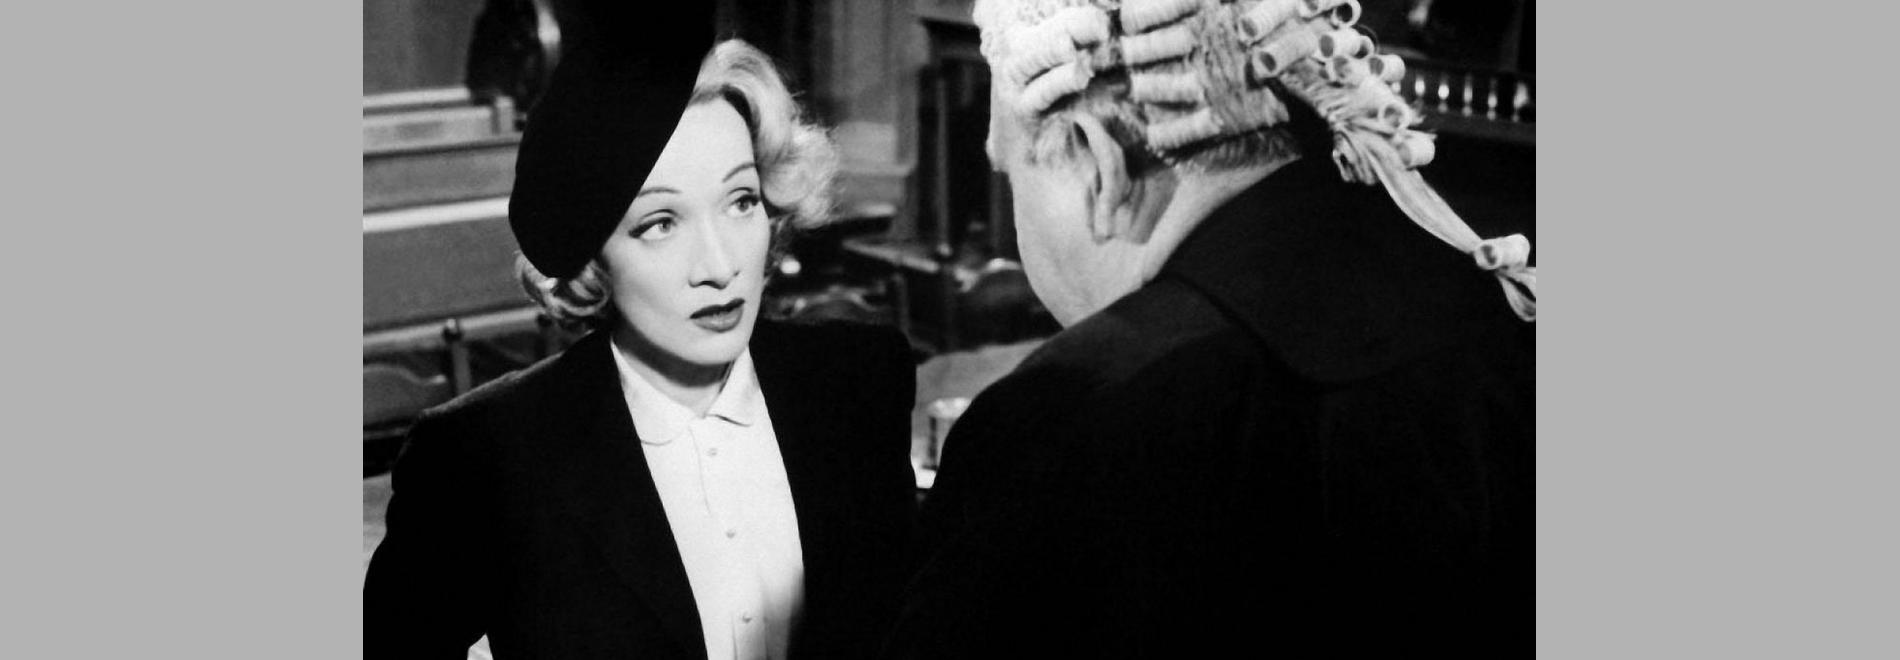 Witness for the Prosecution (Billy Wilder, 1957)